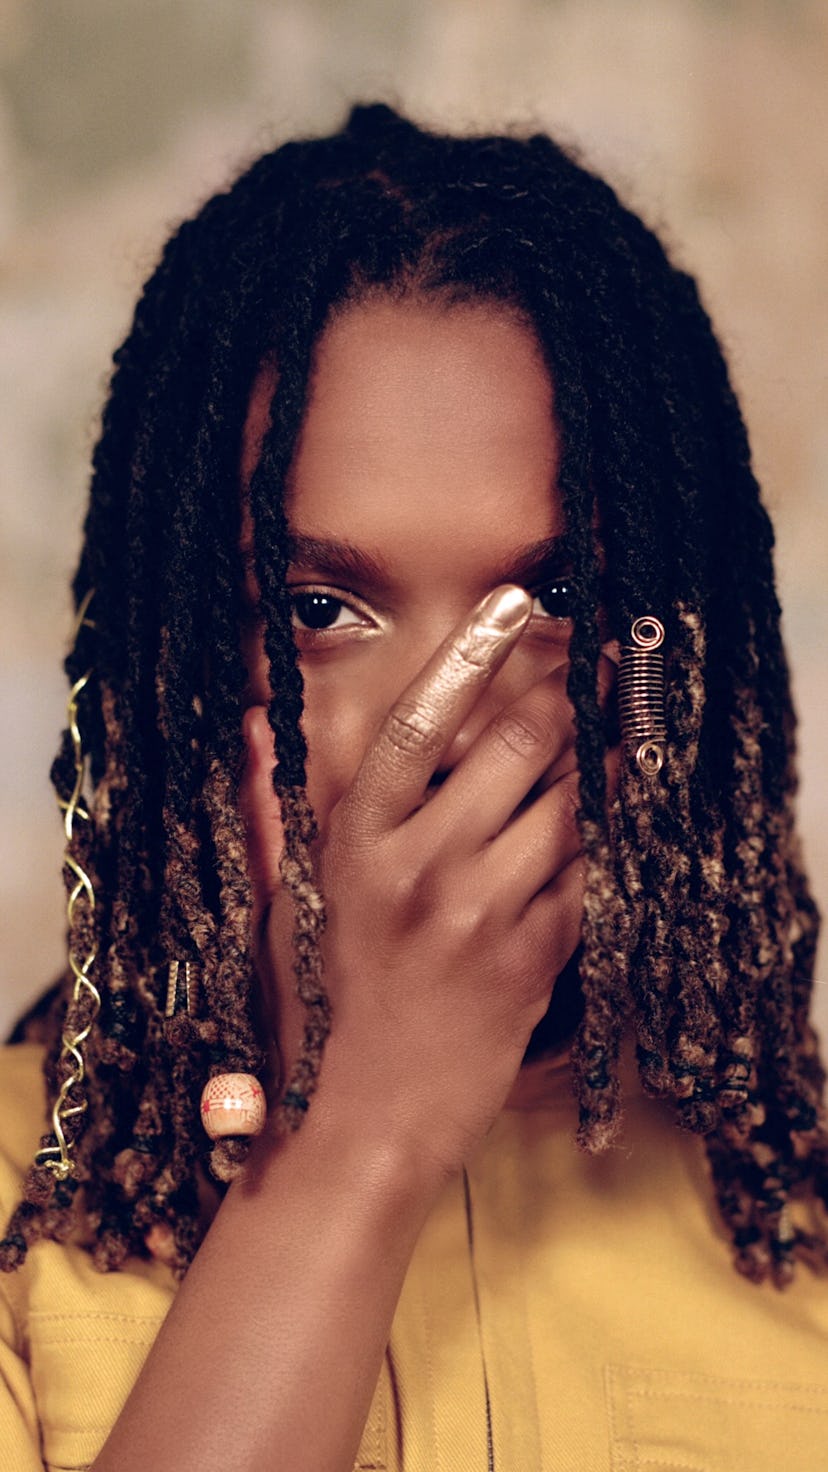 Koffee stands with her hand over her face.